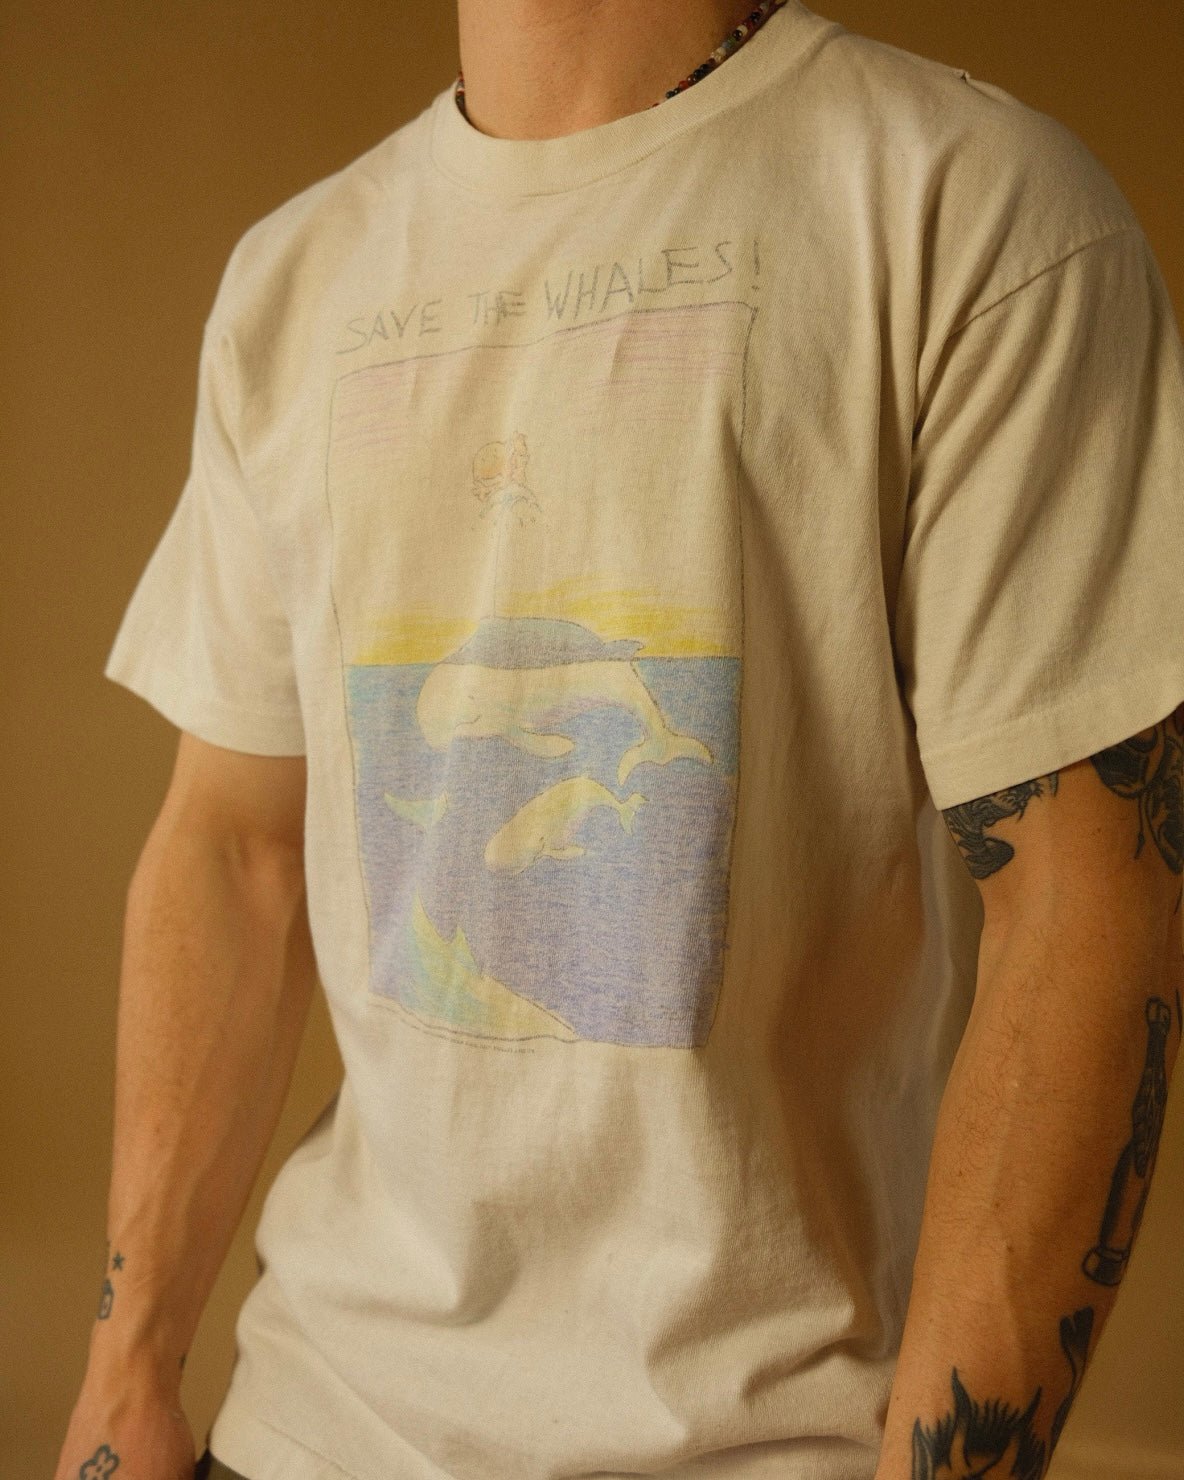 1990s “Save The Whales!” Tee